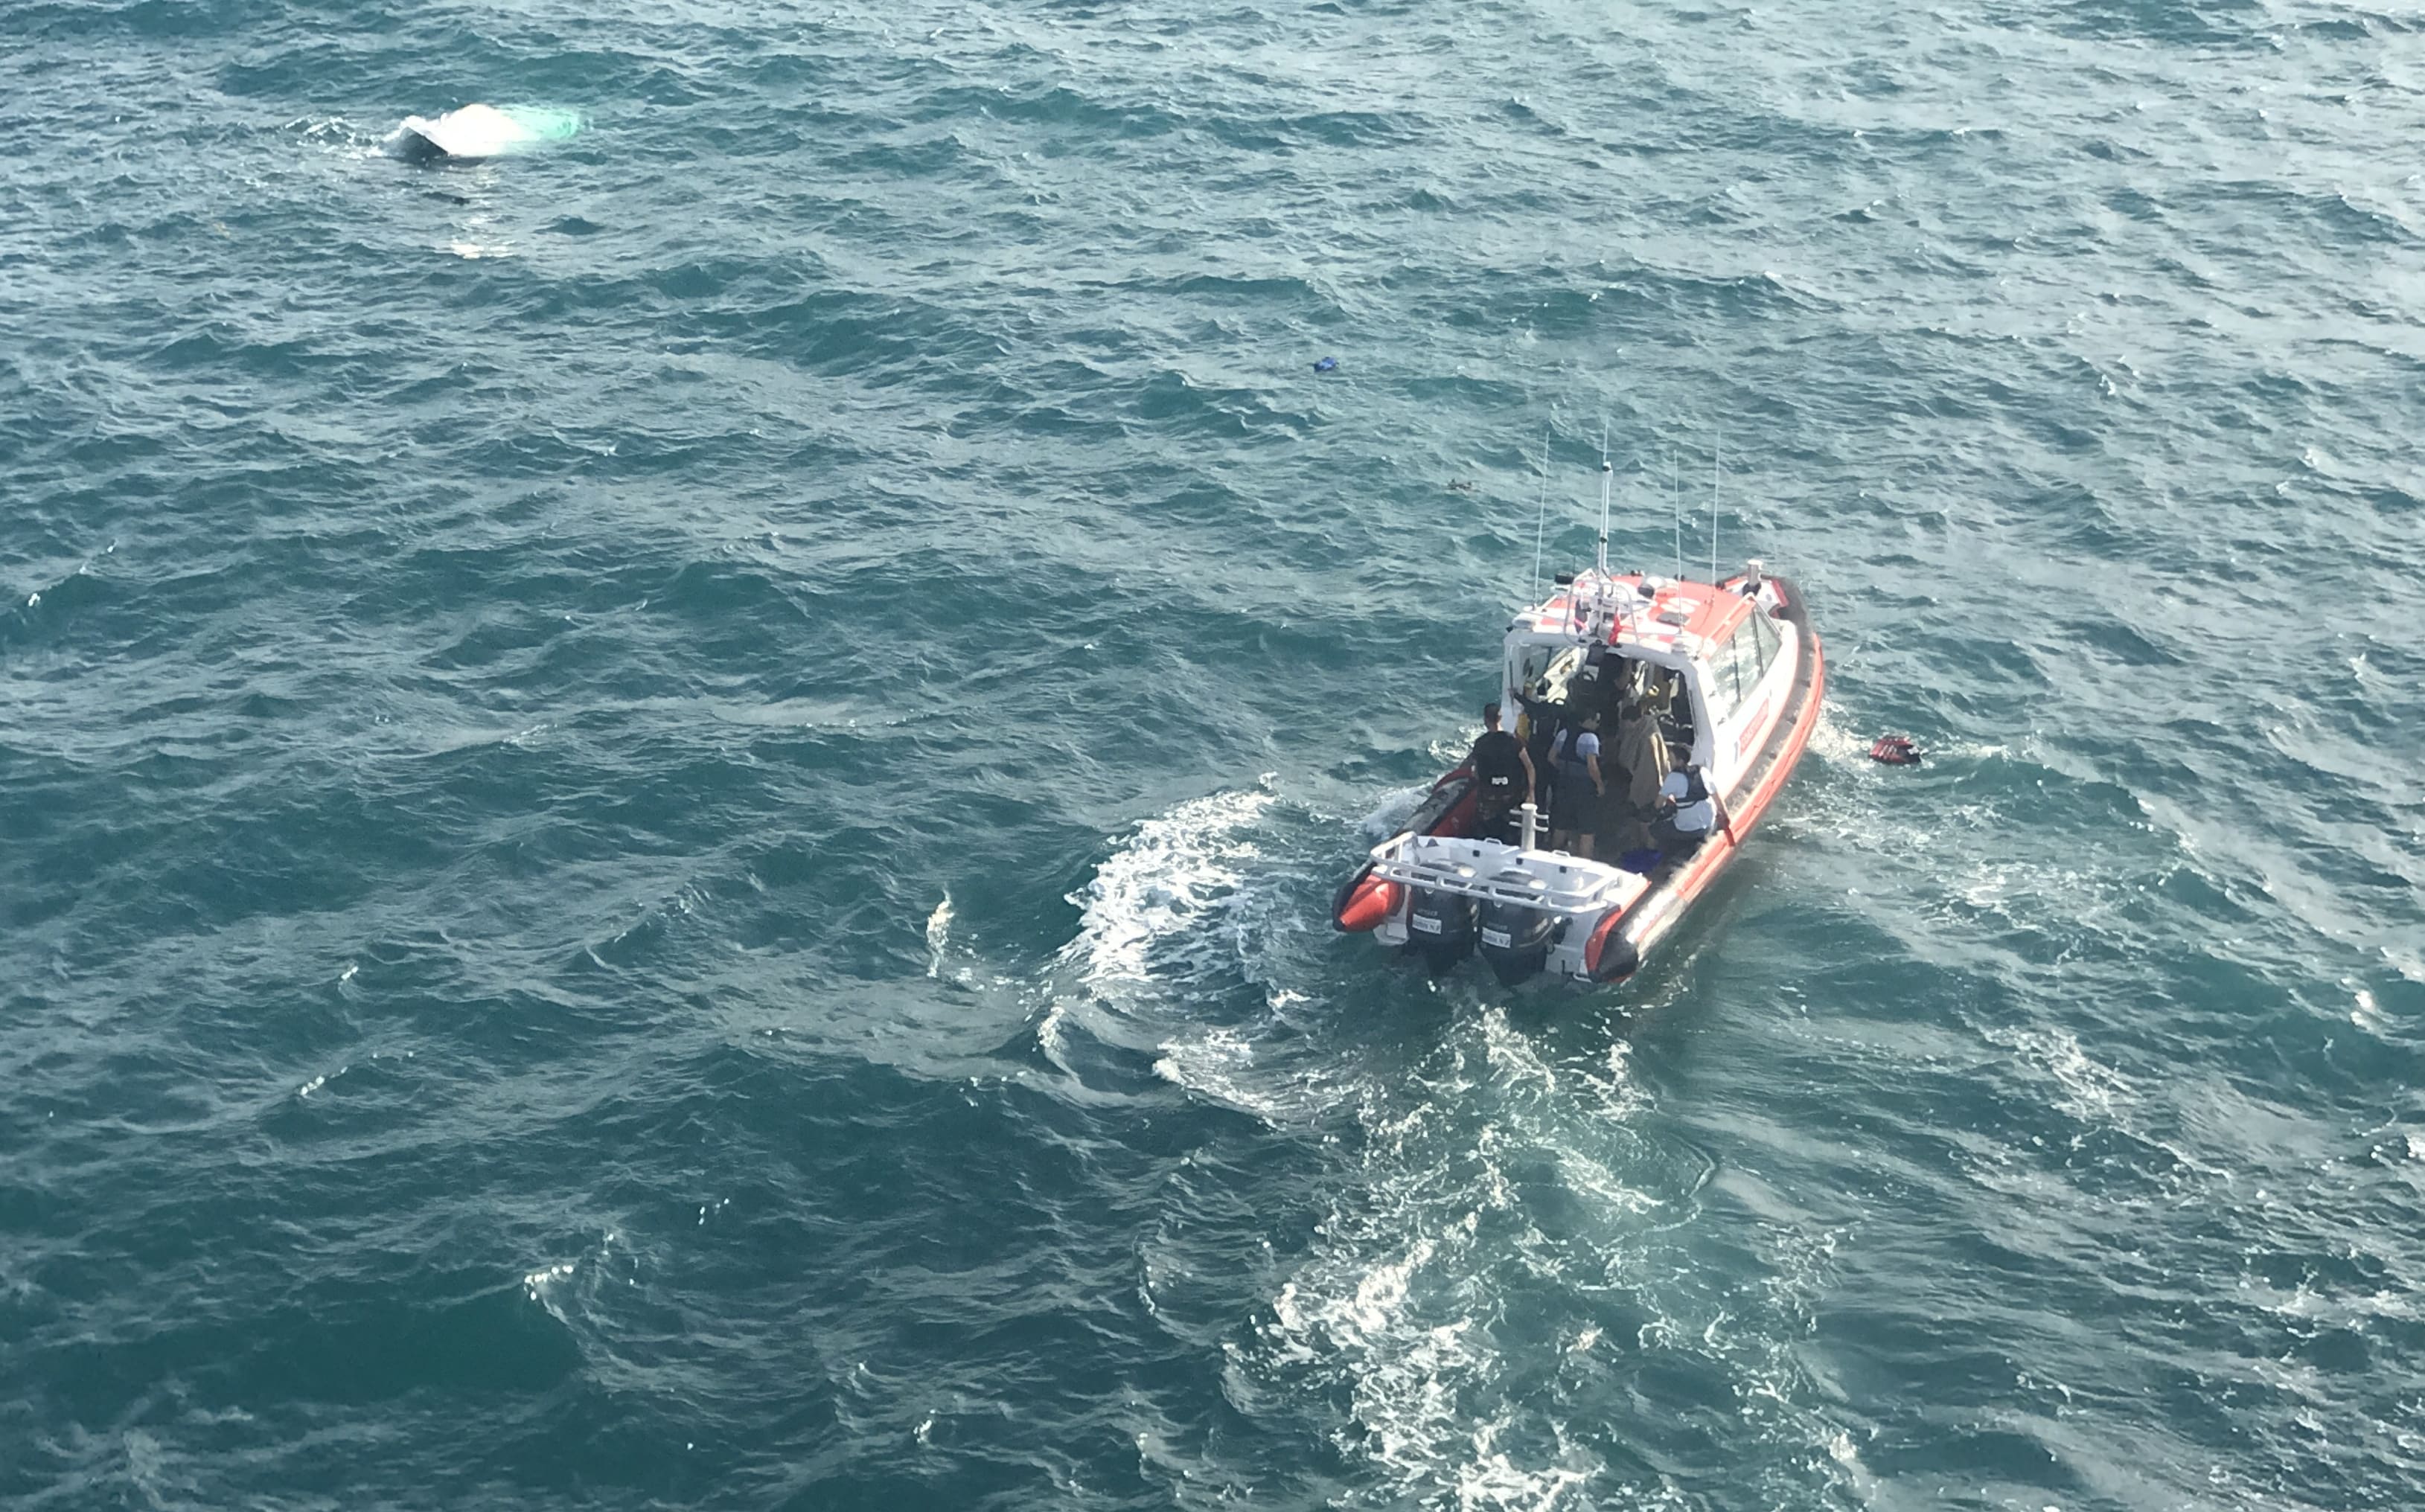 The men were rescued about 3km north of Big Manly, Whangaparaoa.